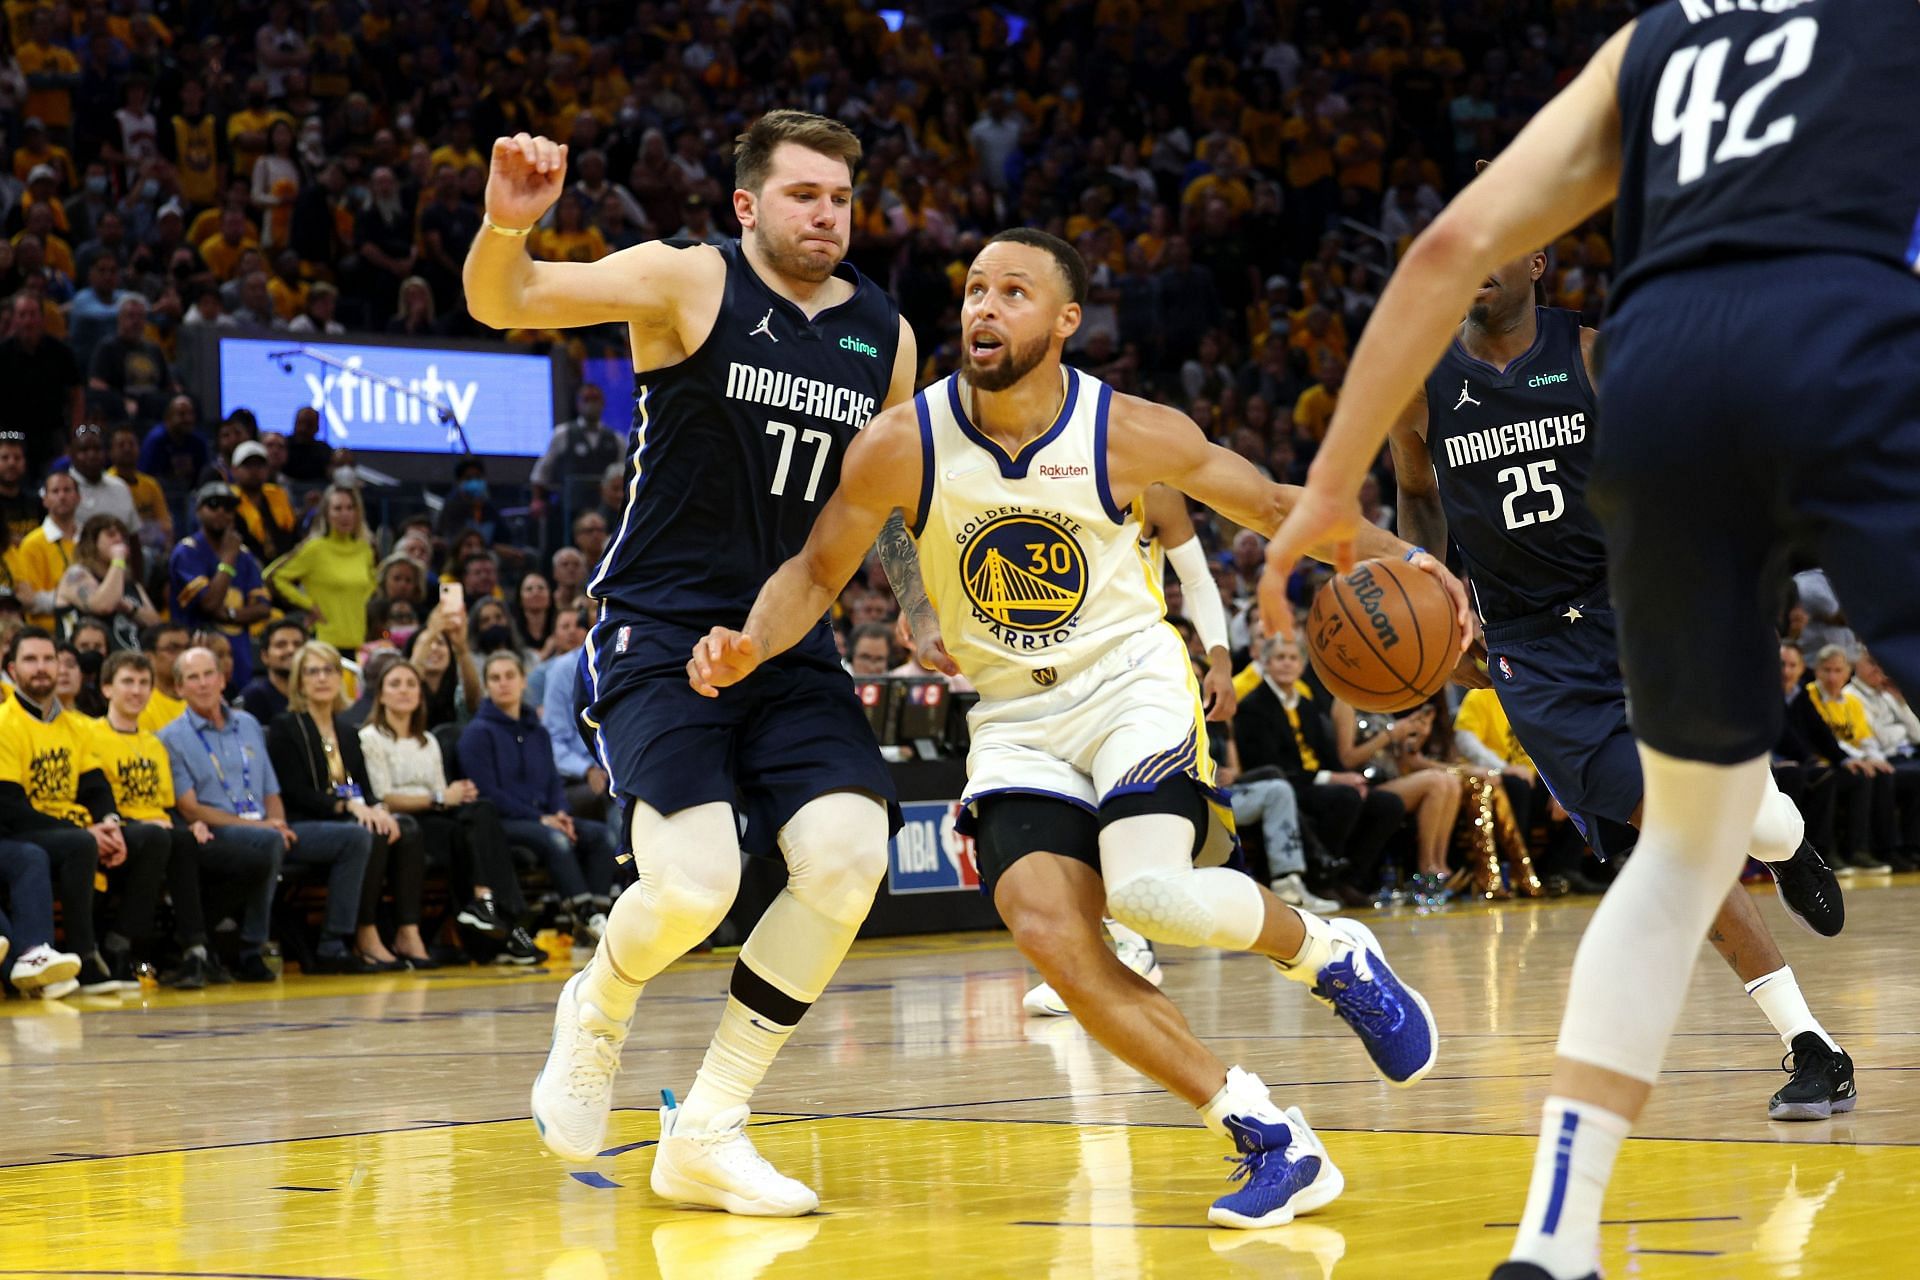 Steph Curry of the Golden State Warriors against Luka Doncic of the Dallas Mavericks.